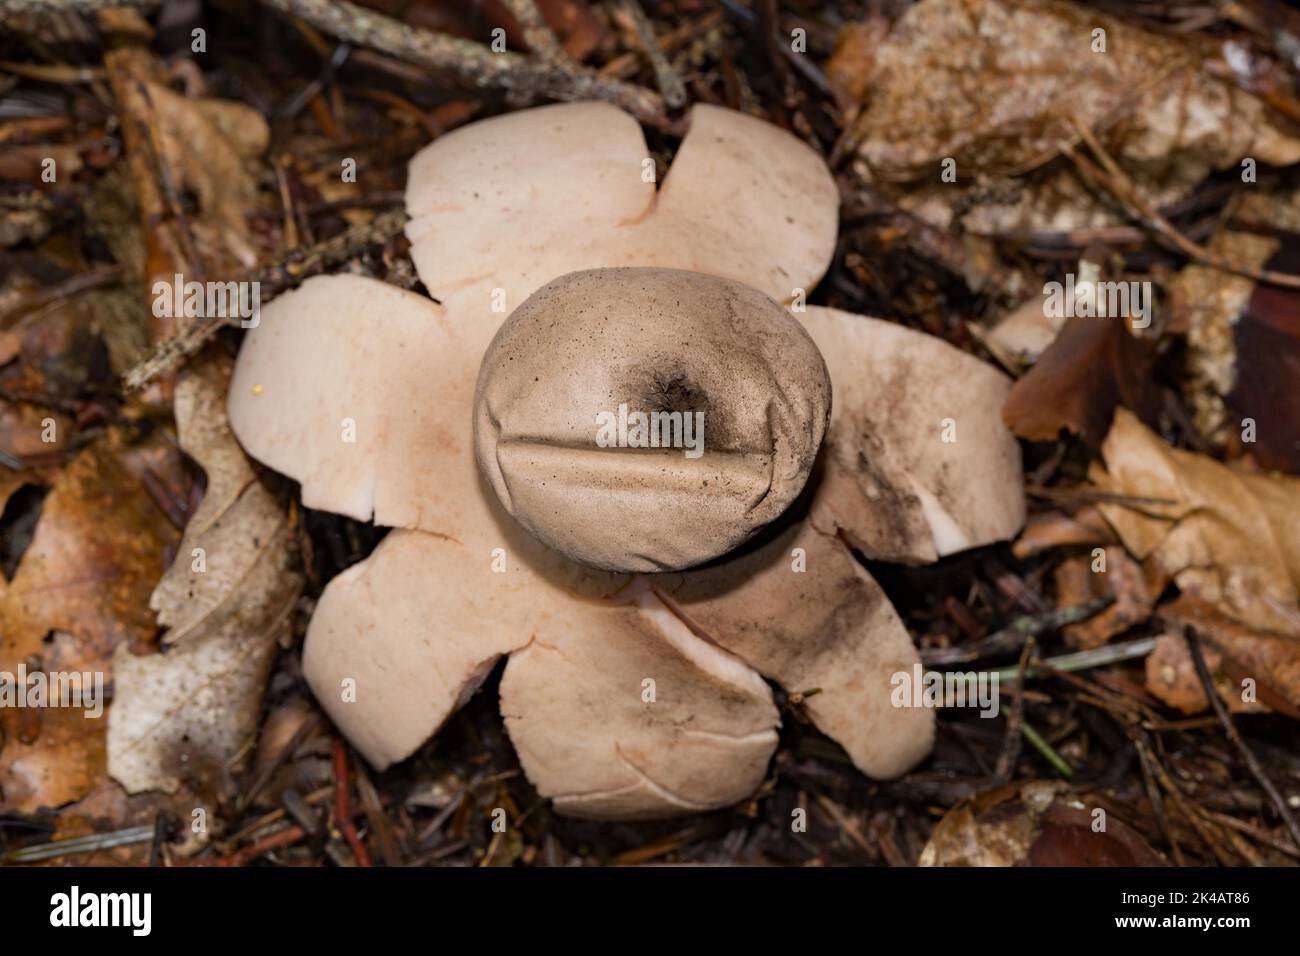 Red earth star pink fruiting body with star-shaped lobes and spore ball in needle litter Stock Photo